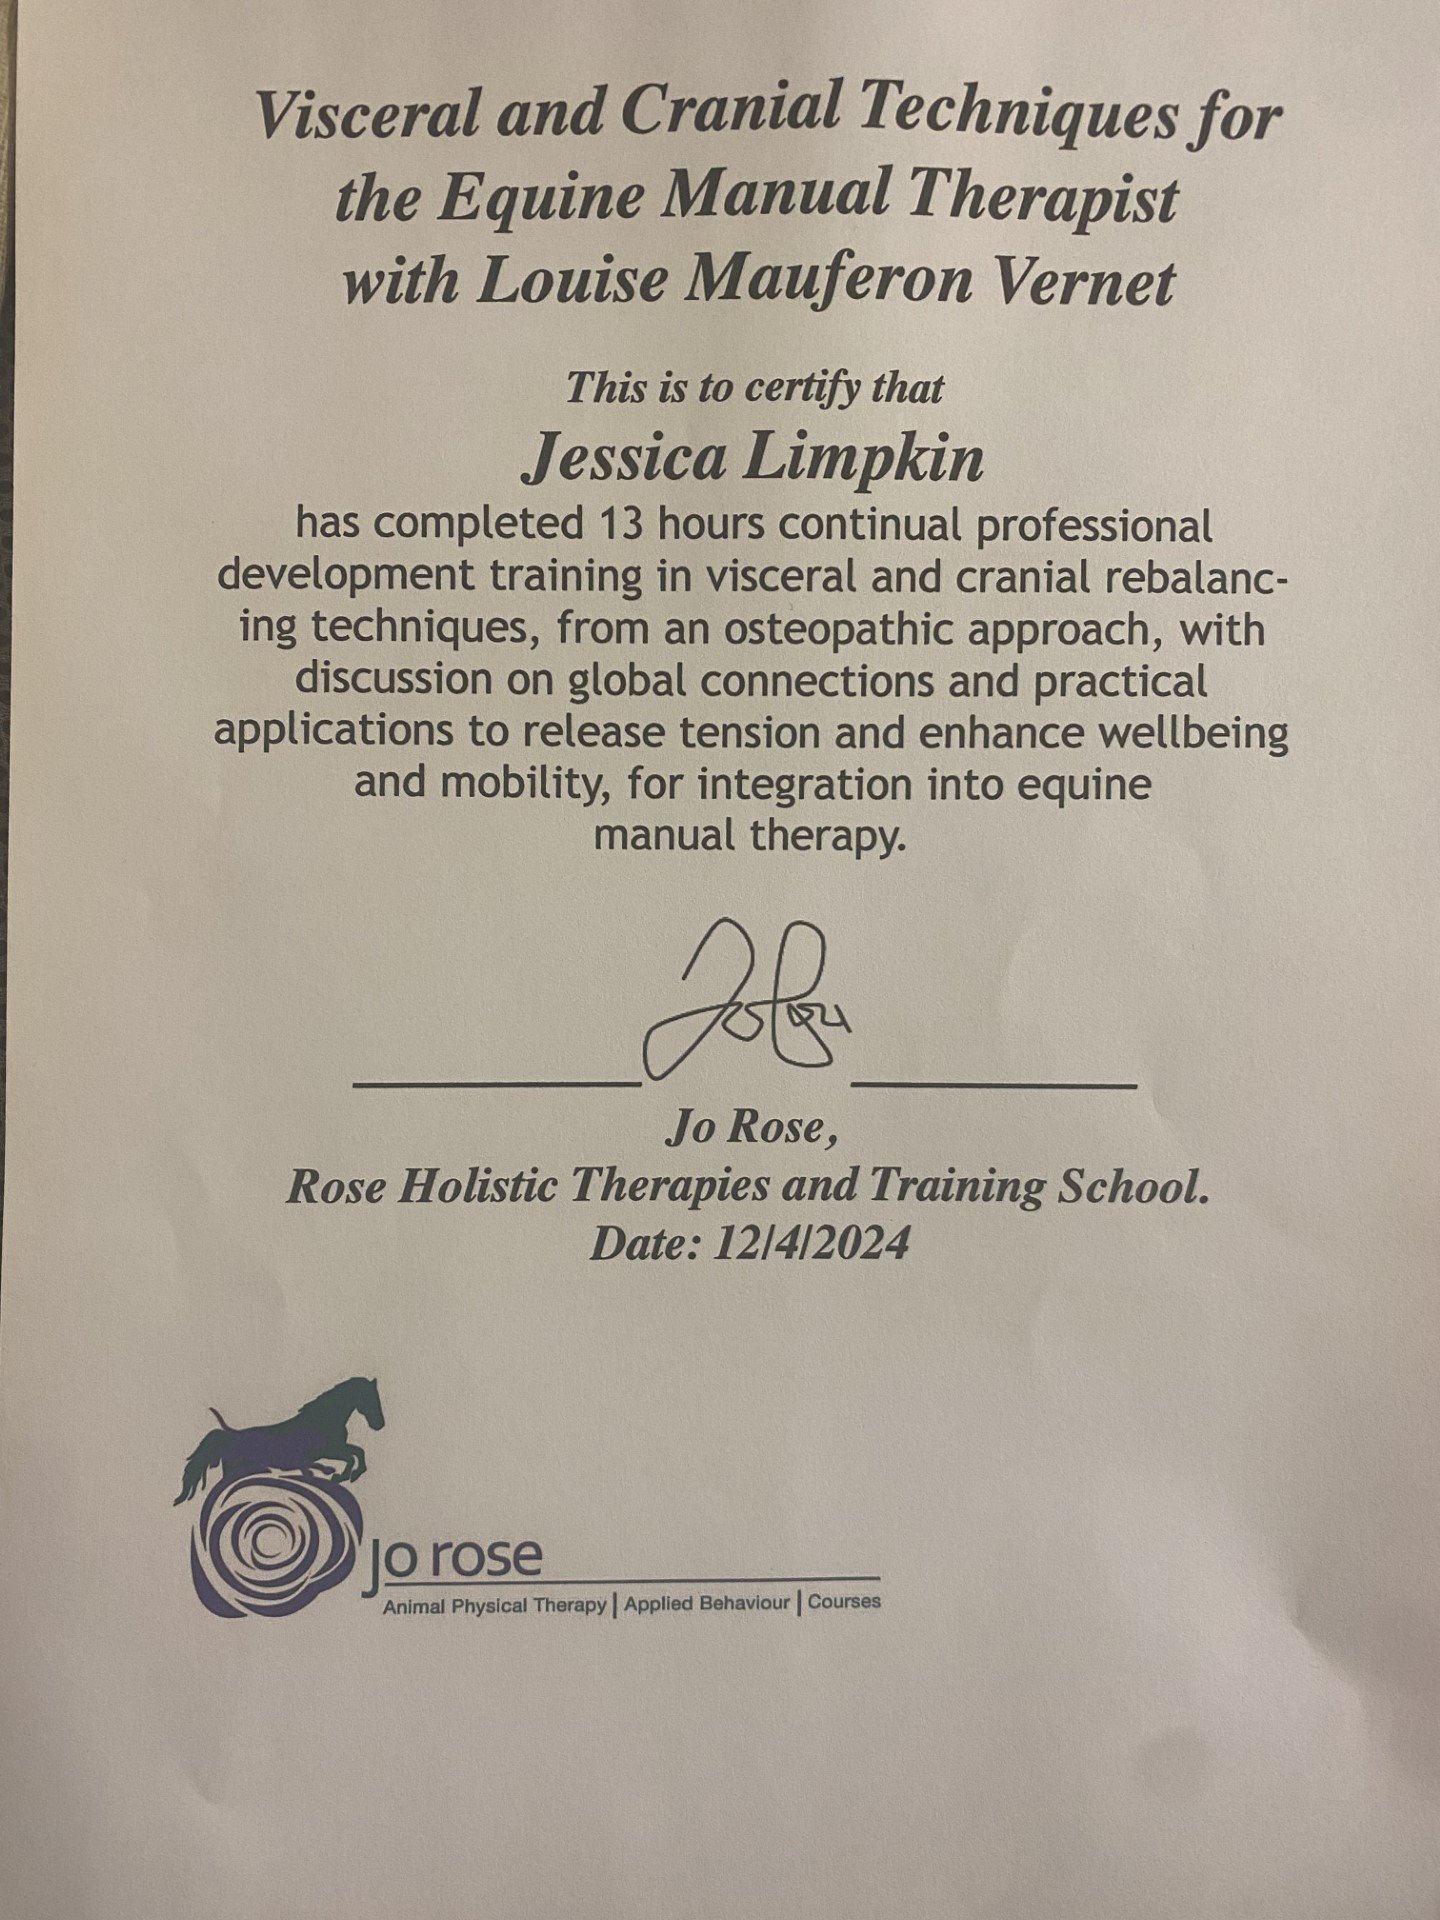 cpd-certificate-jessica-limpkin-equine-massage-therapy-jo-rose-holistic-therapist-training-visceral-cranial-techniques-osteopath-louise-mauferon-vernet.jpg